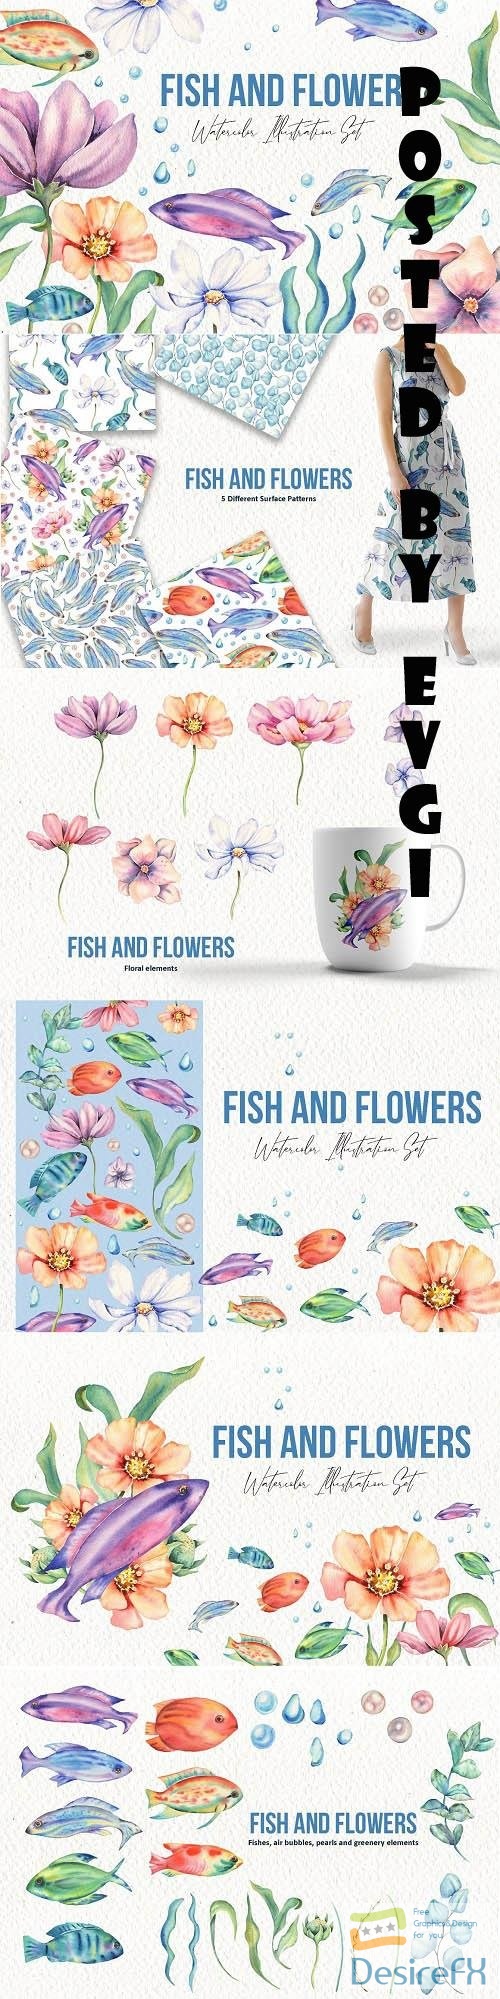 Fishes and Flowers Illustration Set - 6364609